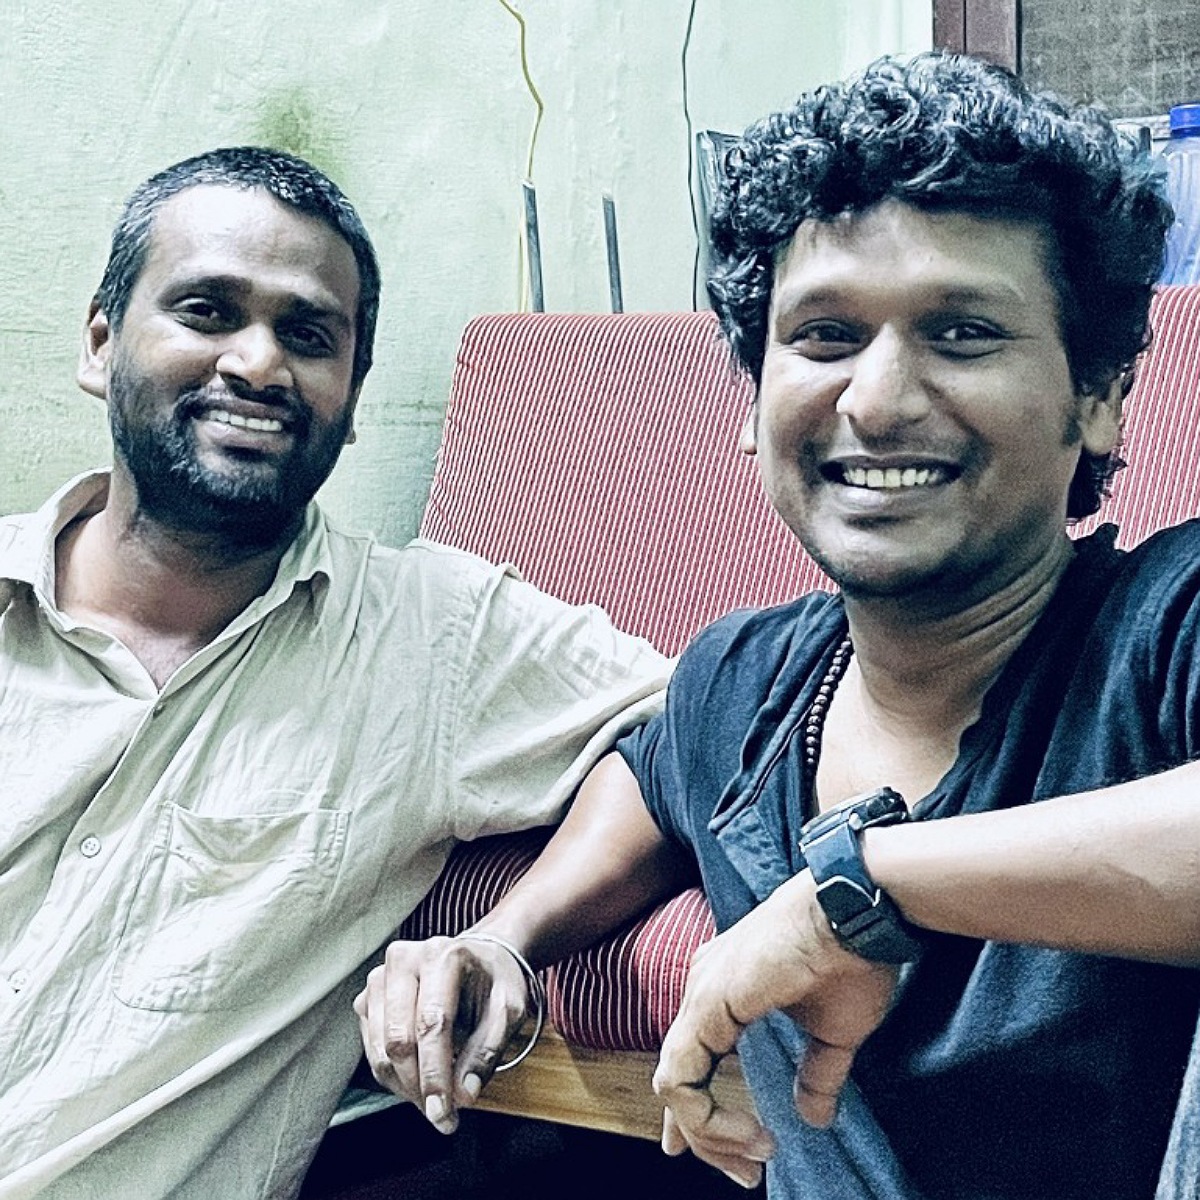 Master director Lokesh Kanagaraj shares PHOTO with his ‘anna’ H Vinoth; Says they spent good time after years